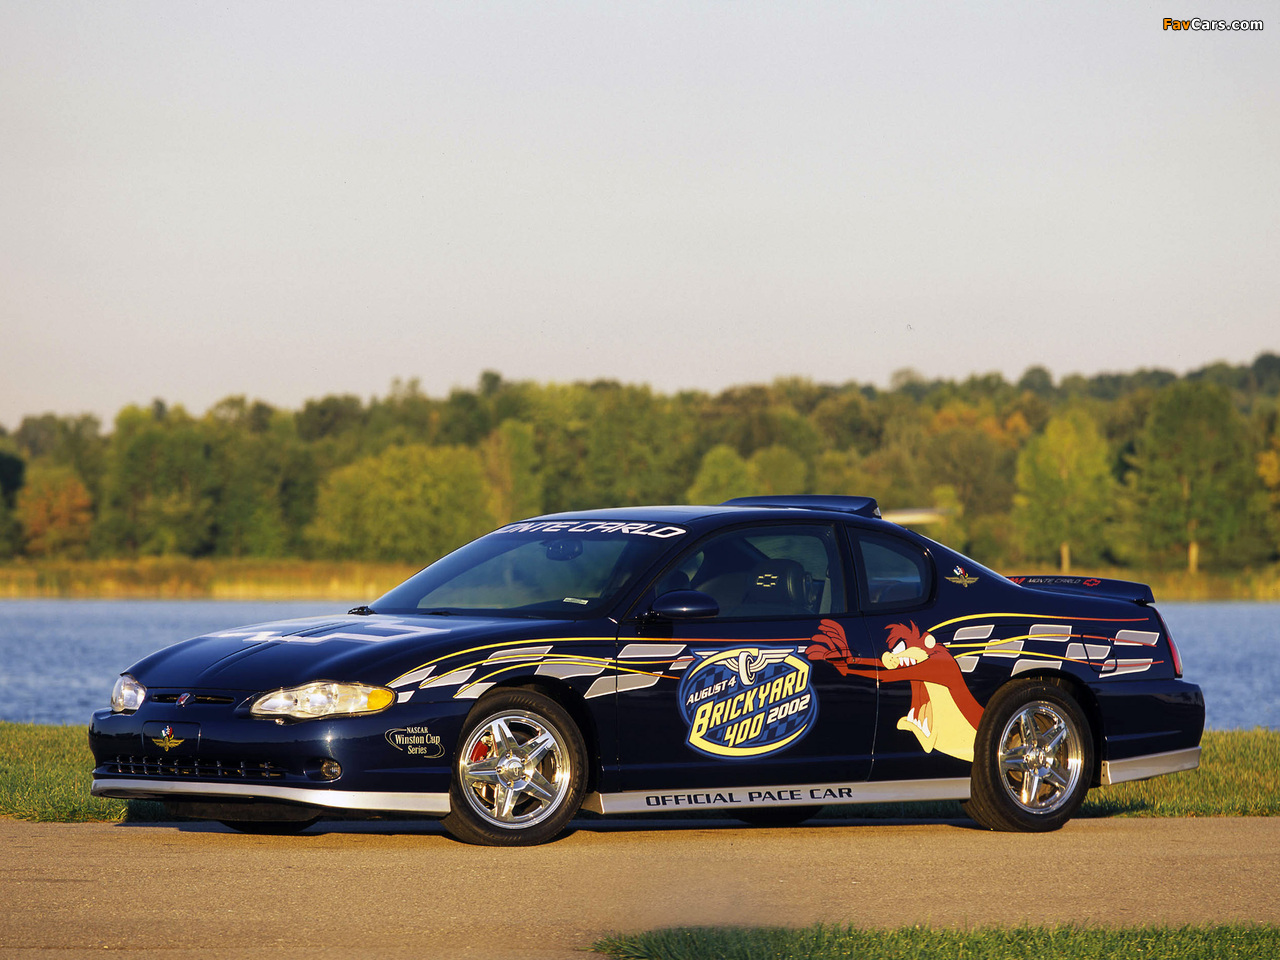 Chevrolet Monte Carlo Brickyard 400 Pace Car 2002 pictures (1280 x 960)